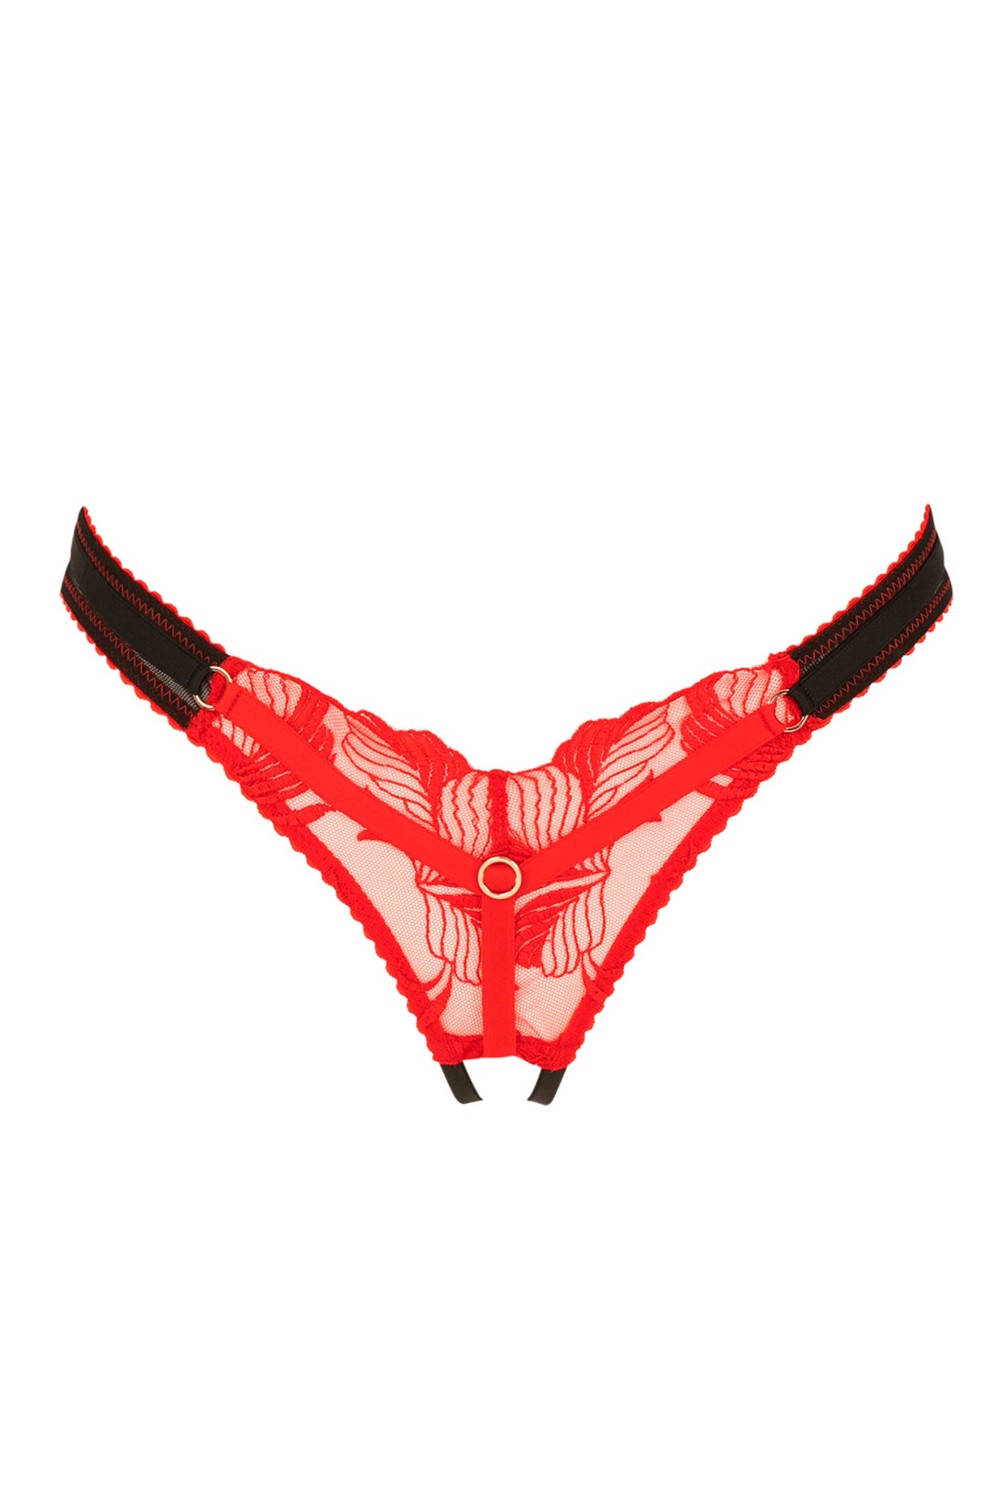 Obsession thong - Luxury lingerie – Impudique Official Website